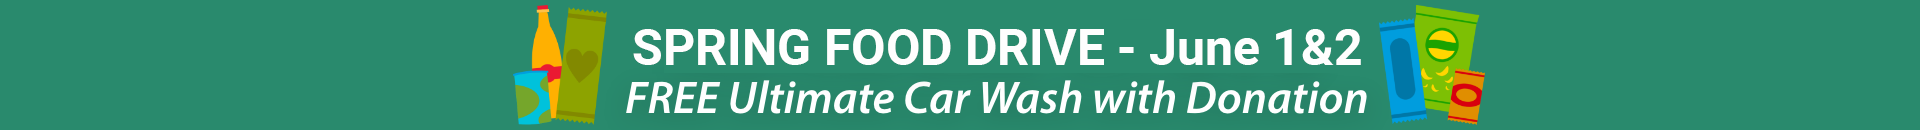 Spring Food Drive banner with a green background